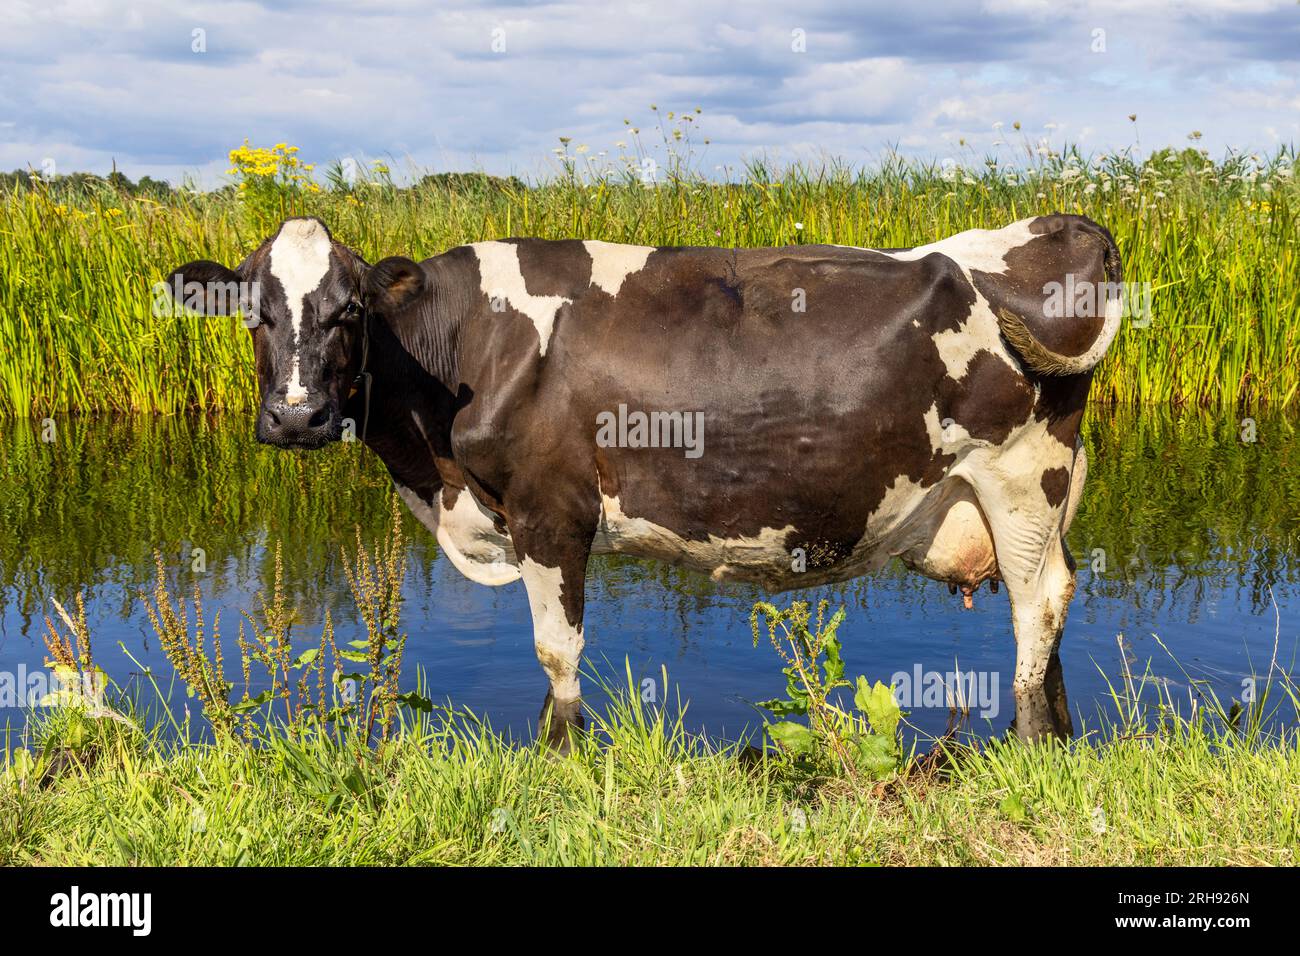 One cow standing in water, cooling down in a ditch, taking a bath in a creek with green banks, and a overcast sky Stock Photo